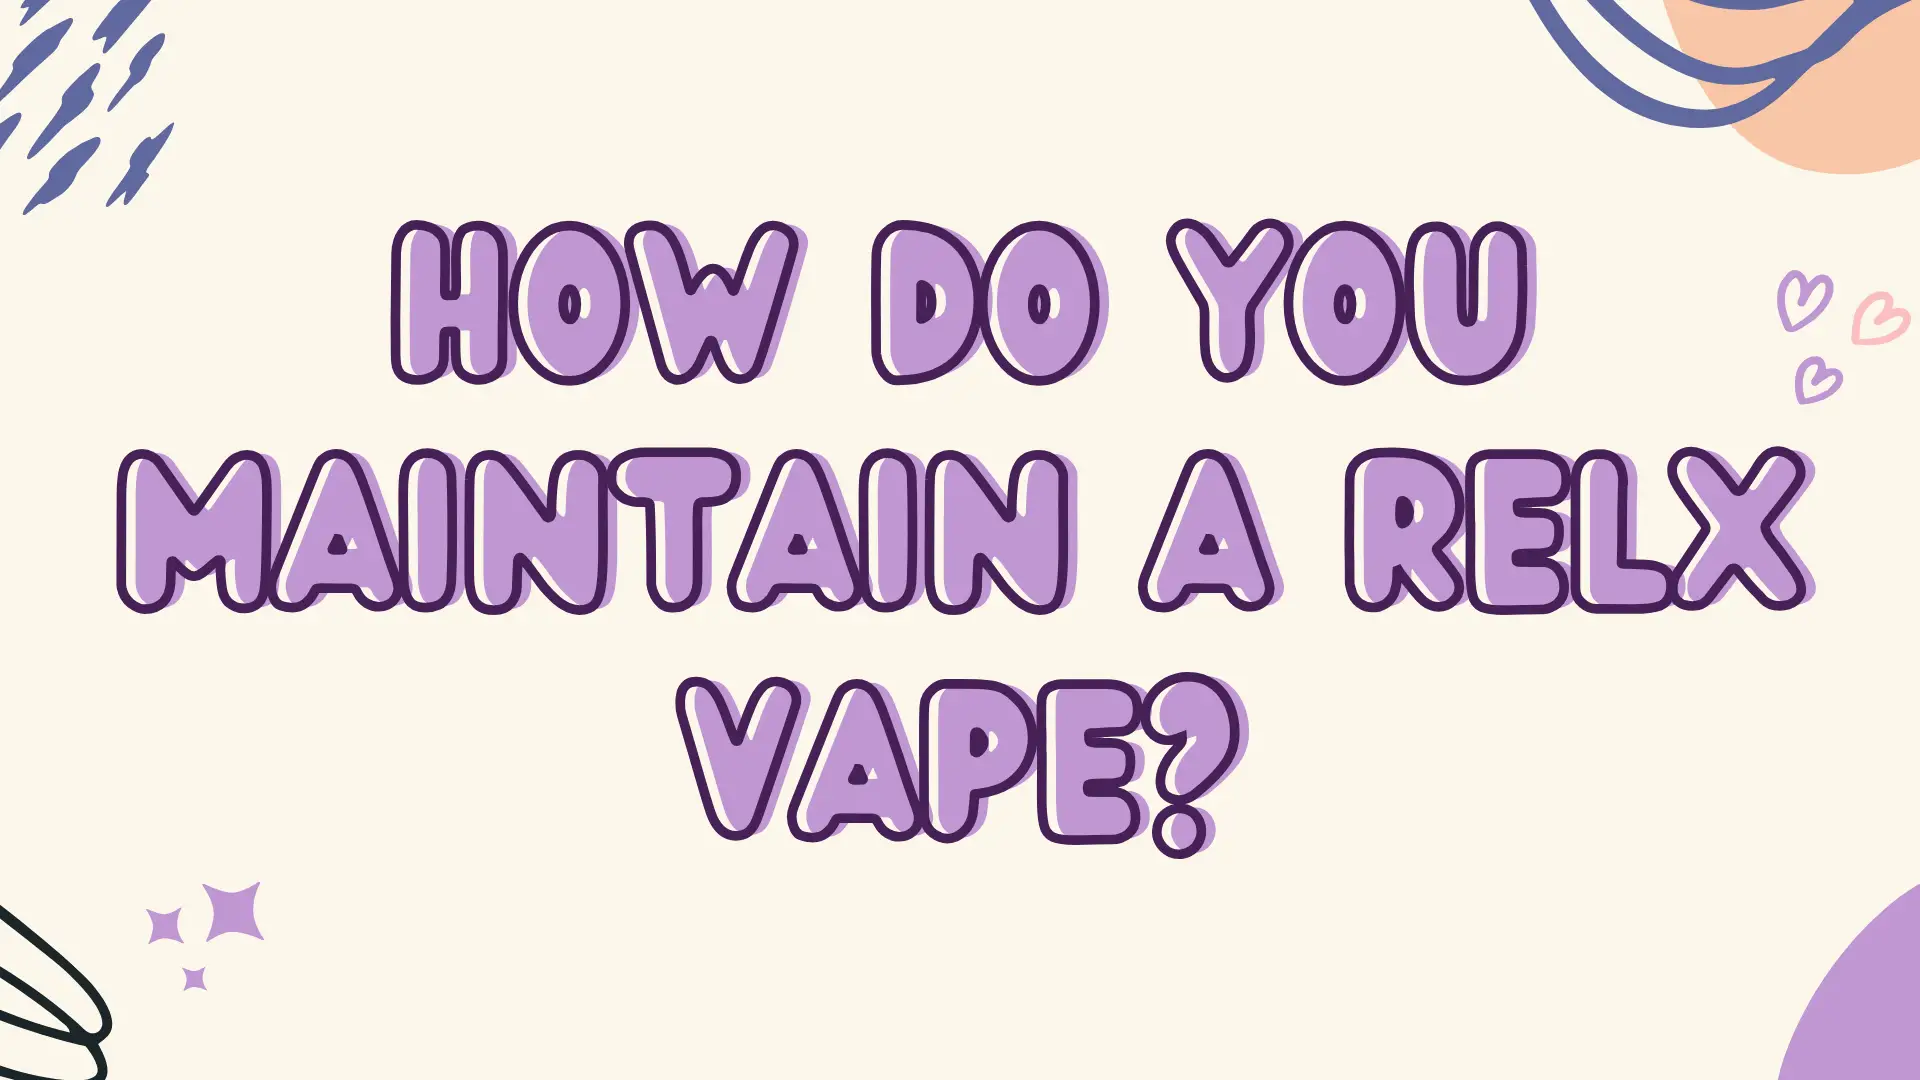 What Is The RELX Flashing Light：How Do You Maintain A RELX Vape?